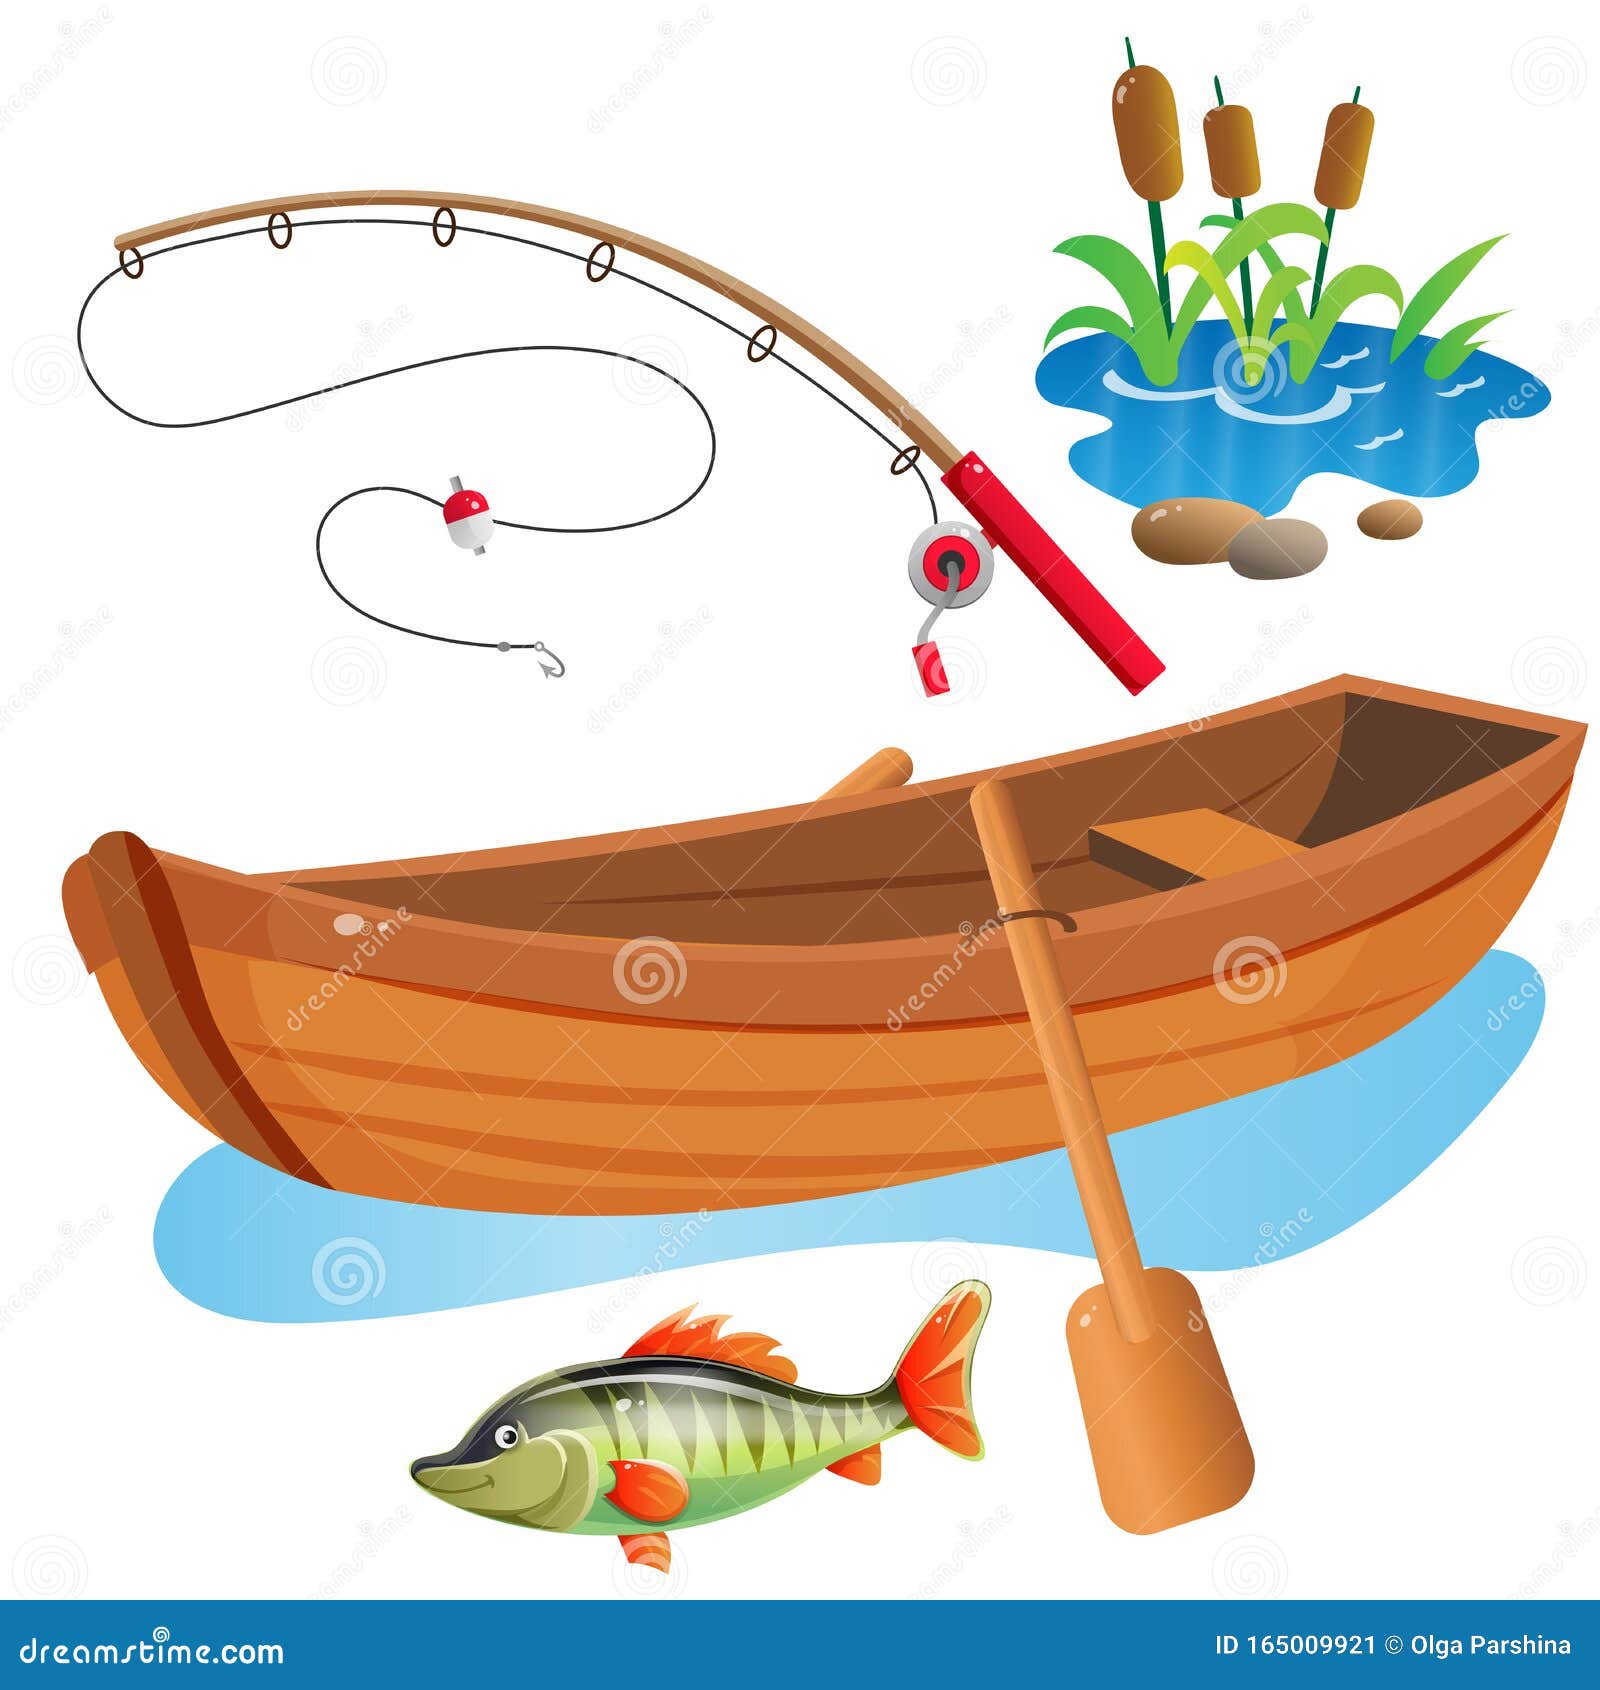 https://thumbs.dreamstime.com/z/color-images-cartoon-boat-paddles-fishing-rod-big-fish-white-background-hobby-fishery-vector-illustration-set-165009921.jpg